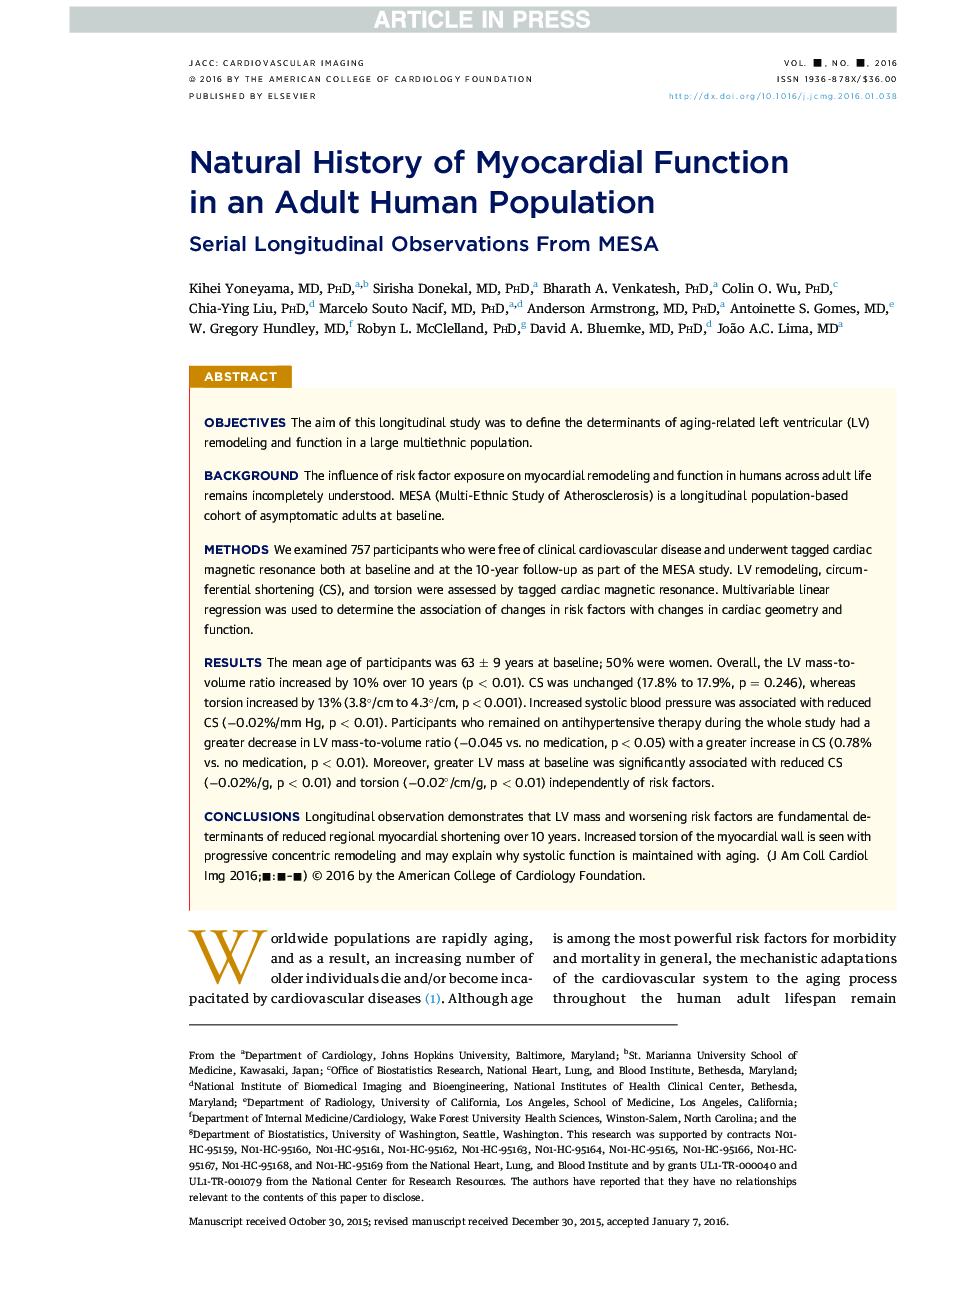 Natural History of Myocardial Function inÂ an Adult Human Population